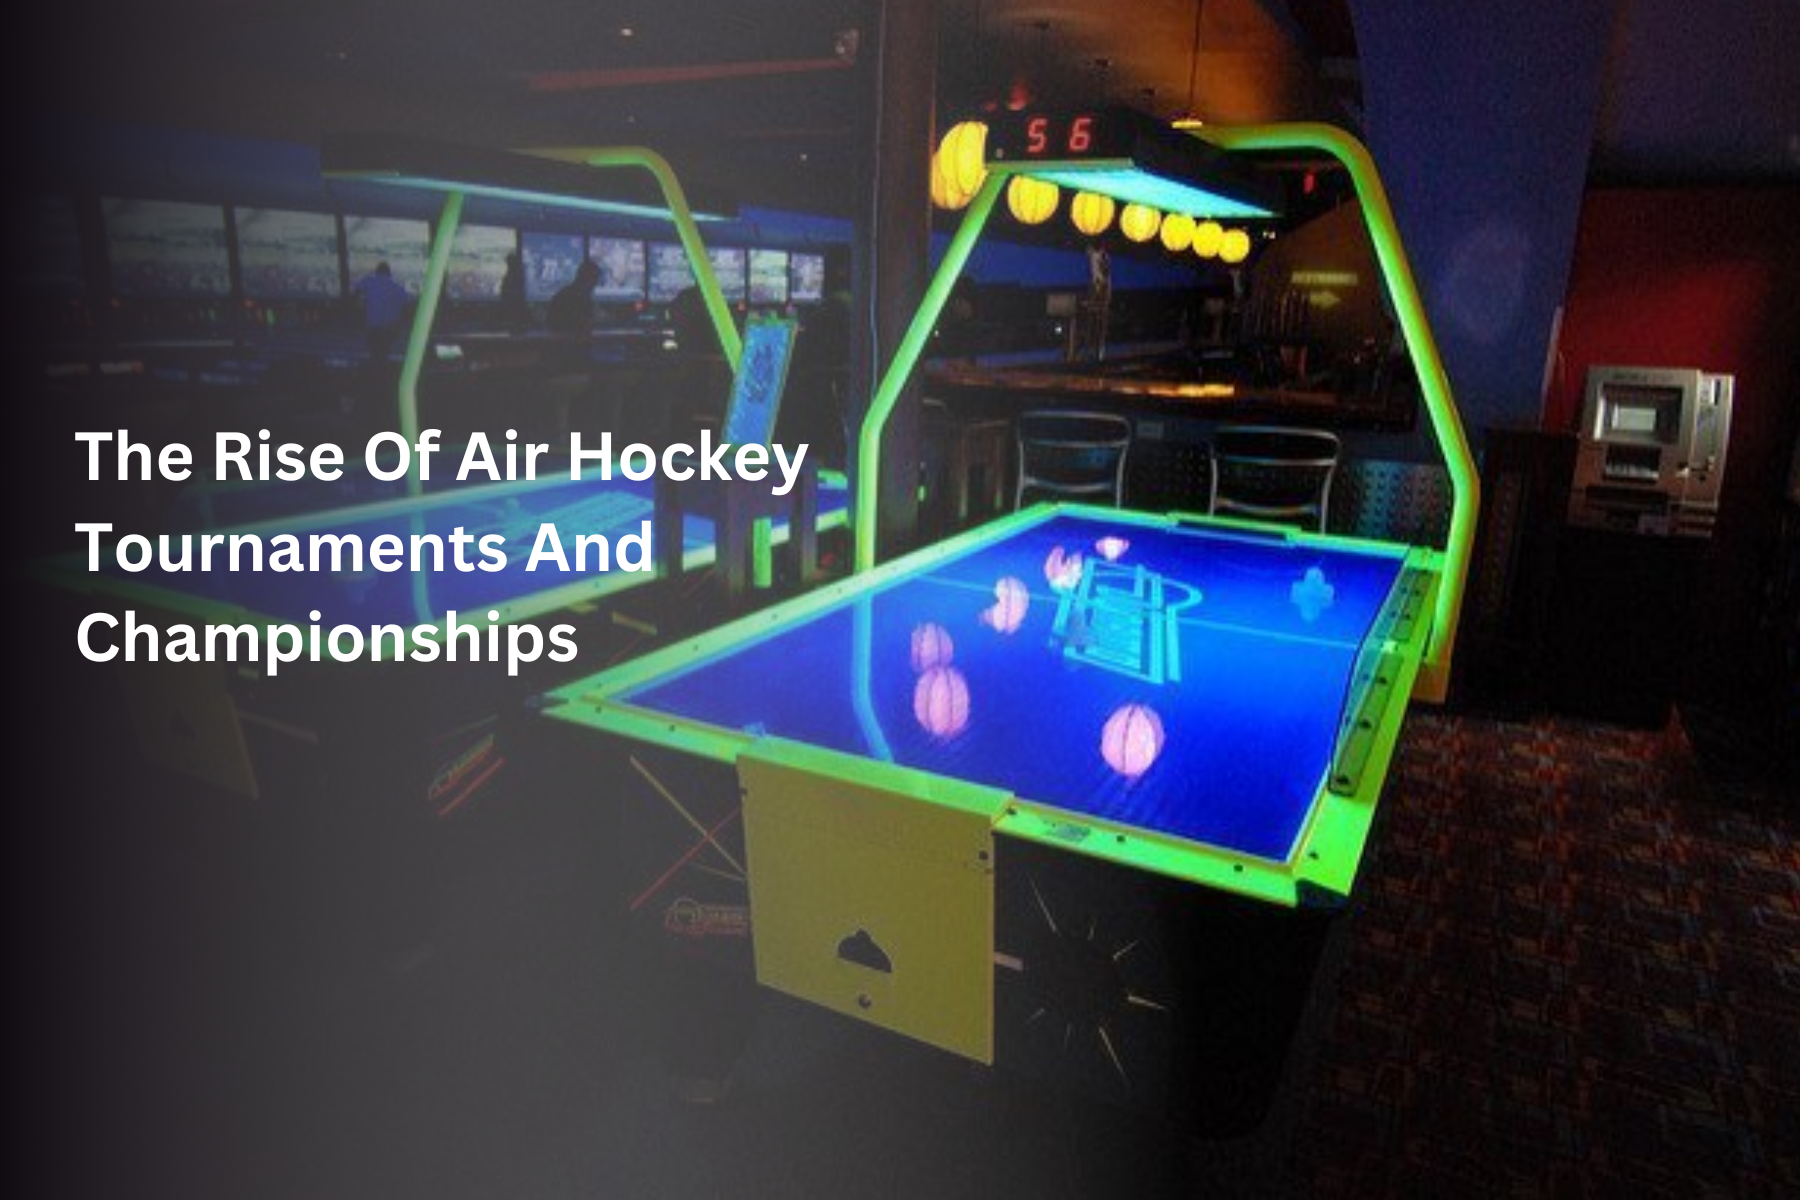 Two Air Hockey tables positioned next to the text "The Rise Of Air Hockey Tournaments And Championships"